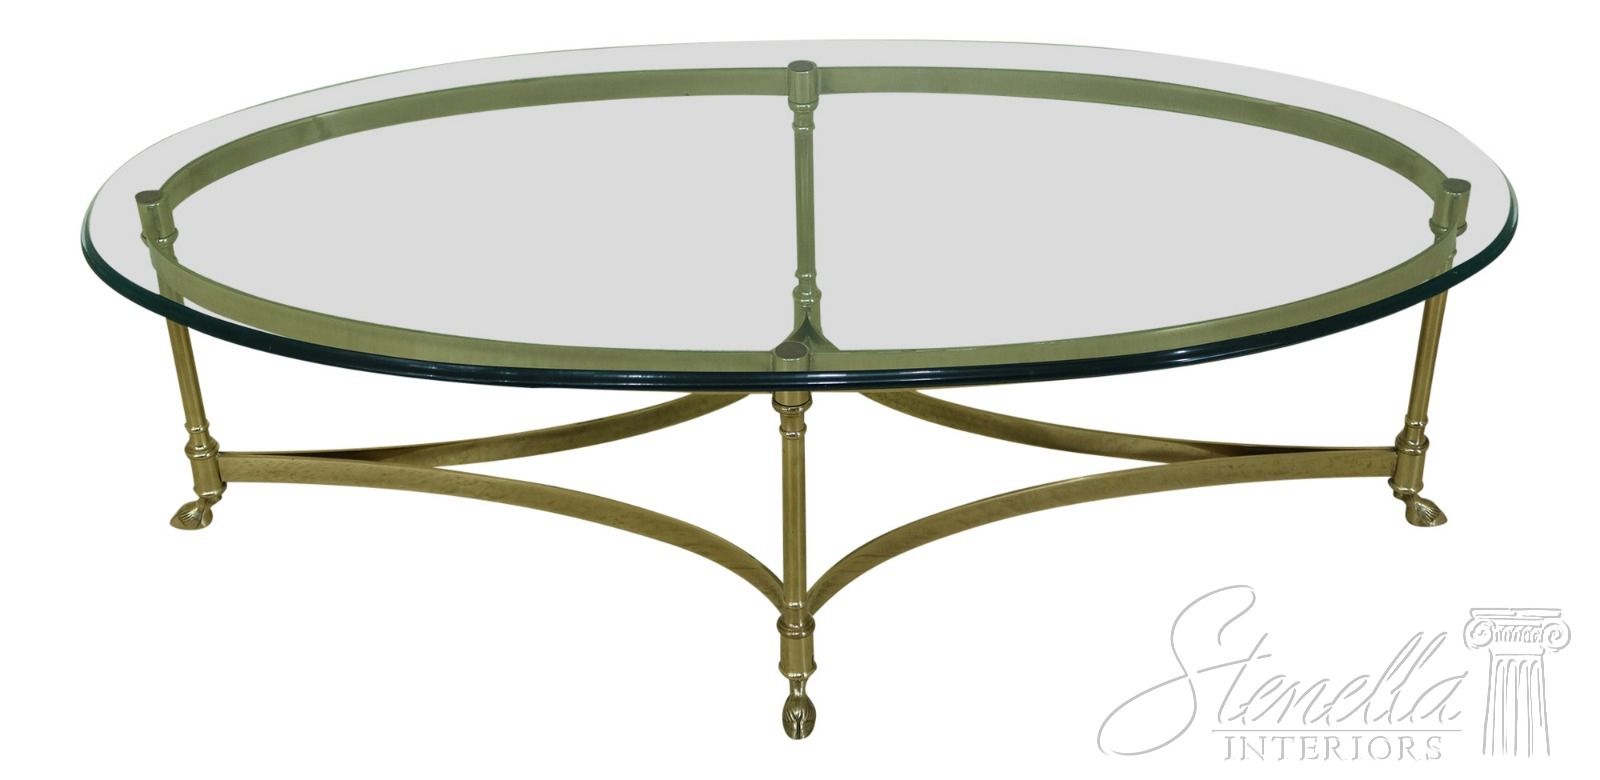 32017ec: Labarge Oval Brass & Glass Regency Coffee Table Inside Glass And Gold Oval Coffee Tables (View 3 of 15)